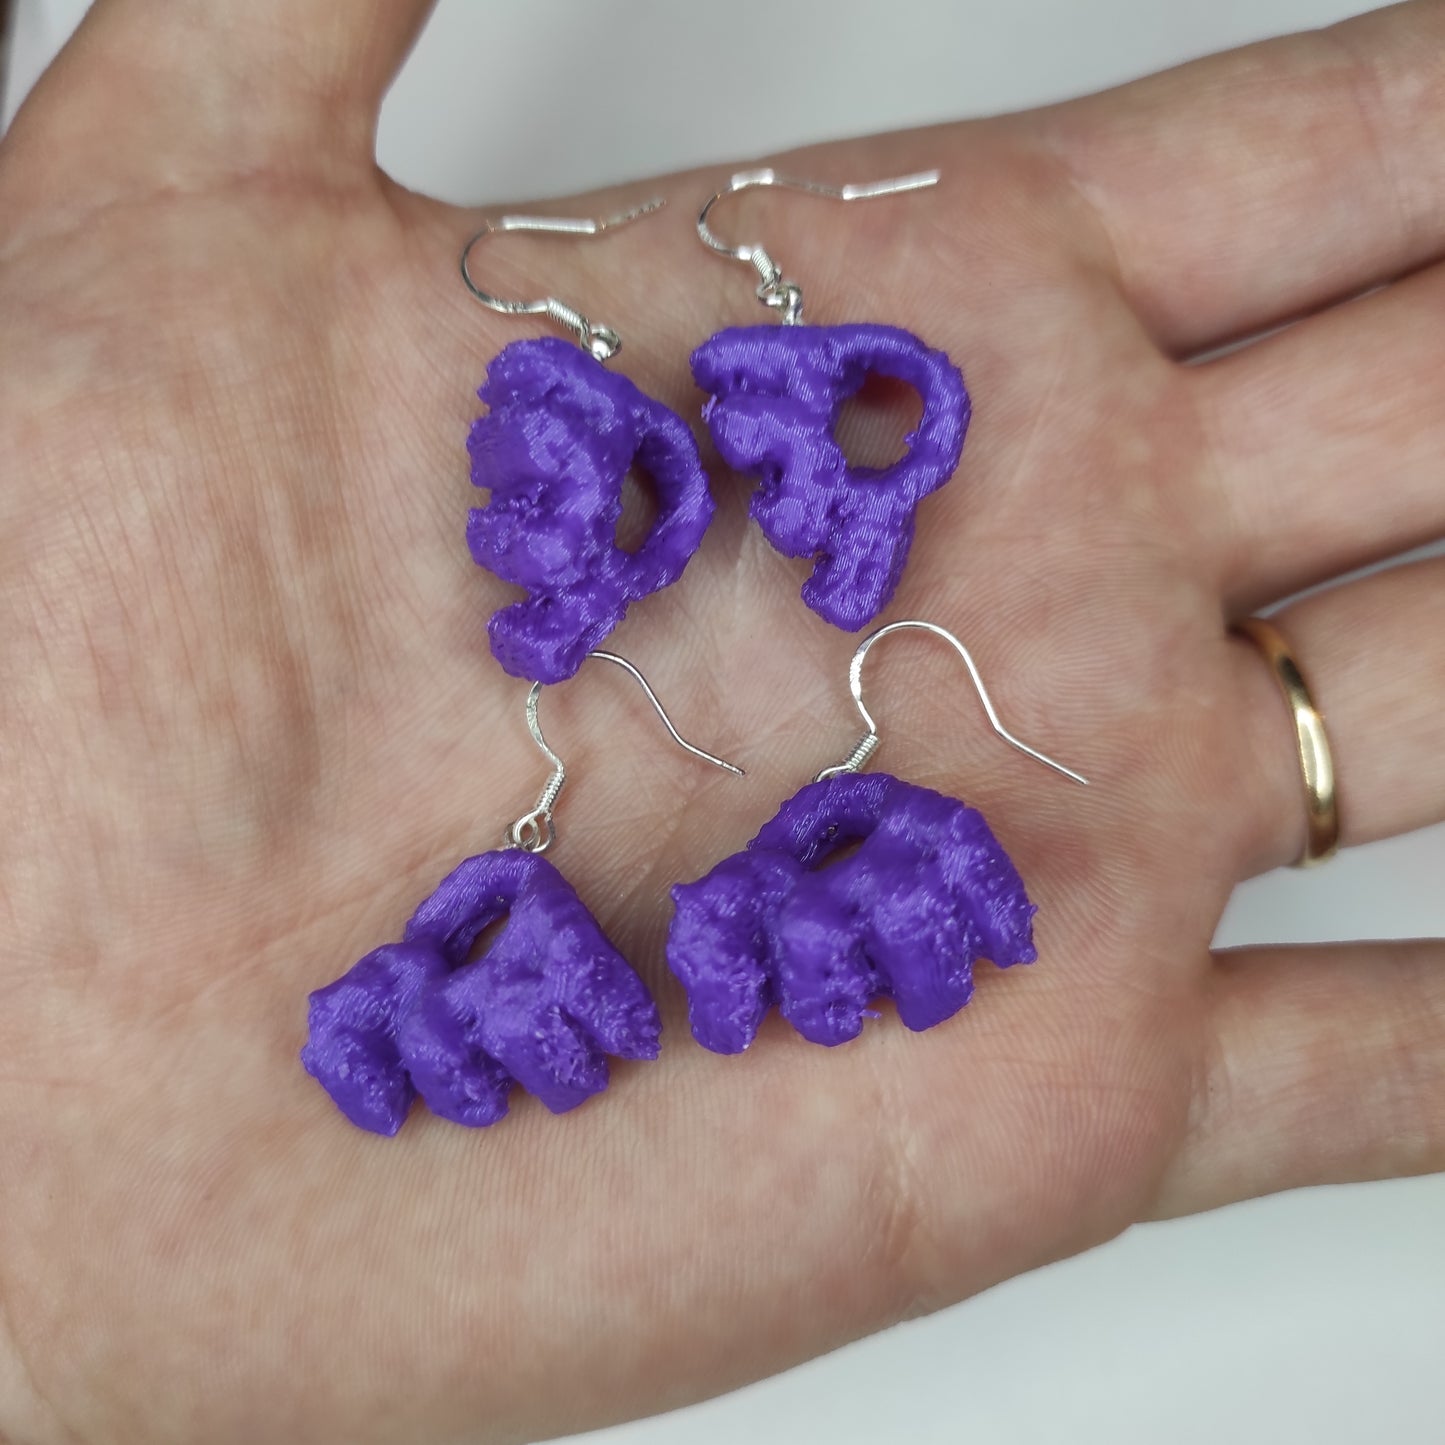 Monster Munch Earrings / All Flavours and Colours Available / Great Girlfriend or Boyfriend Gift / Crisps Snack Jewellery